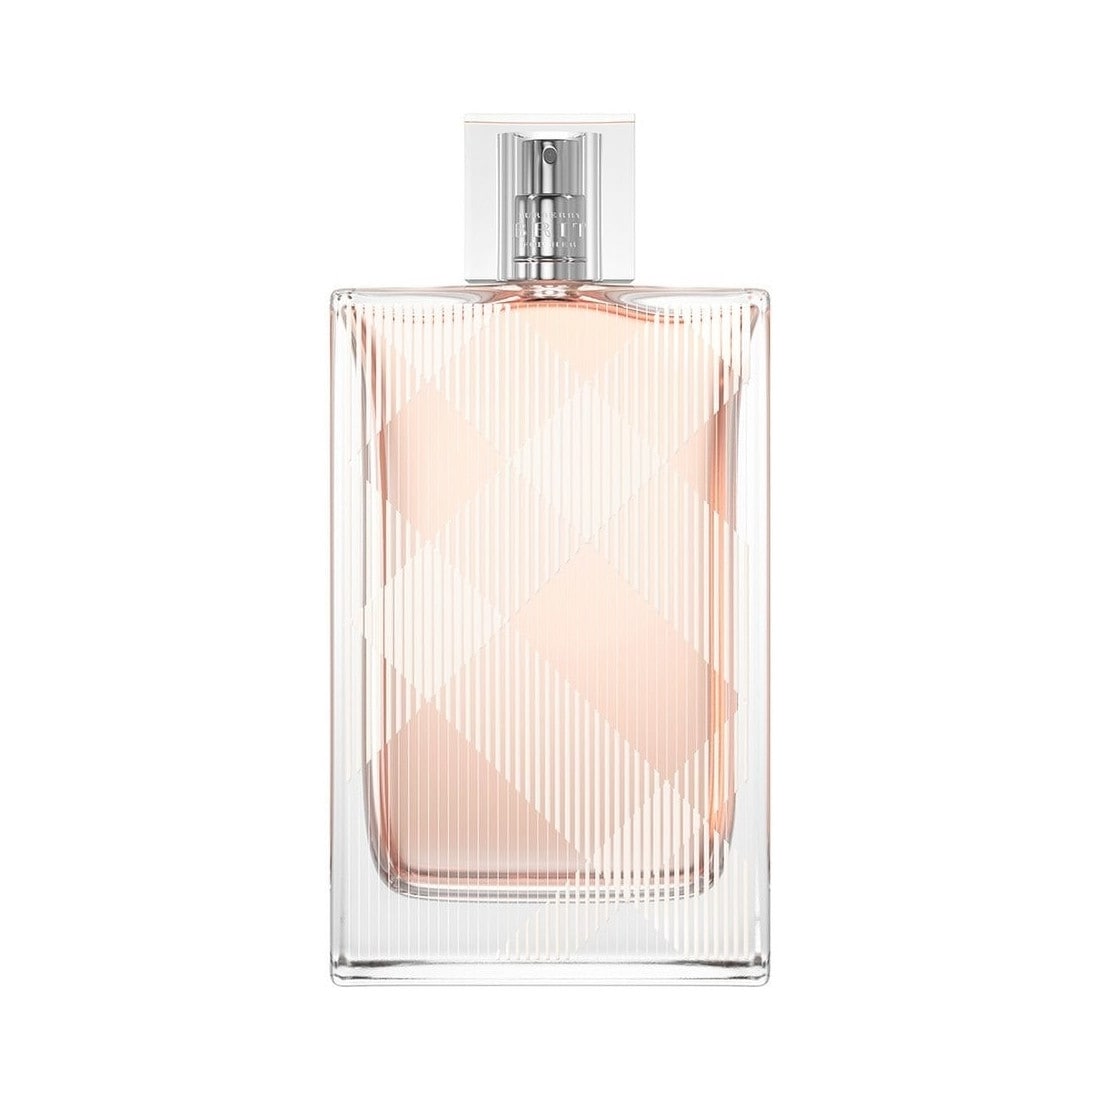 Burberry Brit EDT Spray Perfume for Women by Burberry